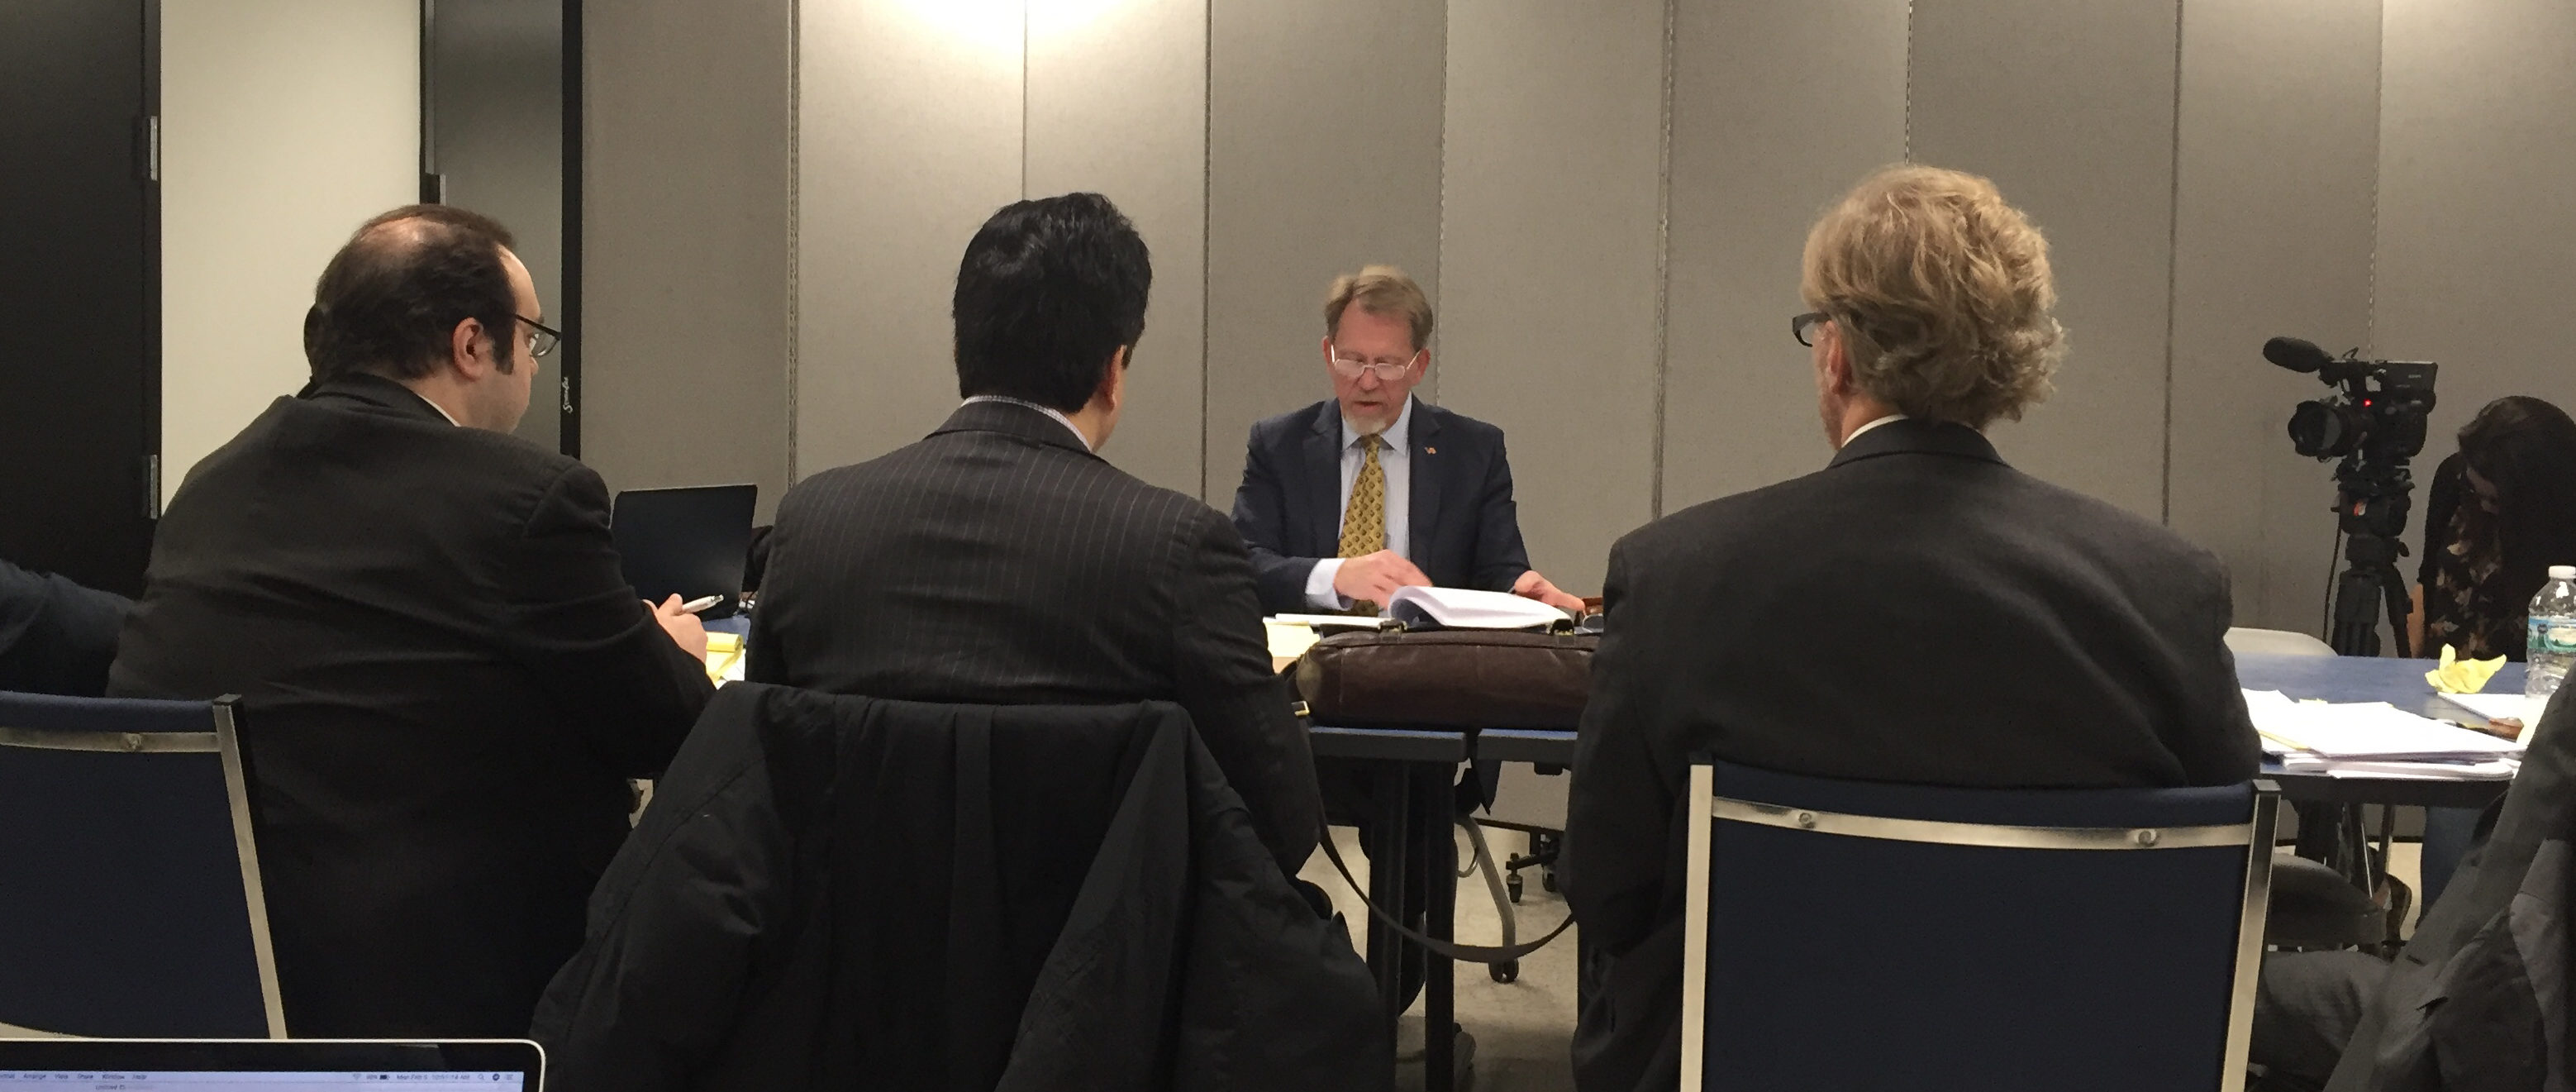 Hearing officer Chris Agrella delivers his final recommendations to attorneys Frank Avila (left) and Andrew Finko (right) on Feb. 5, 2018